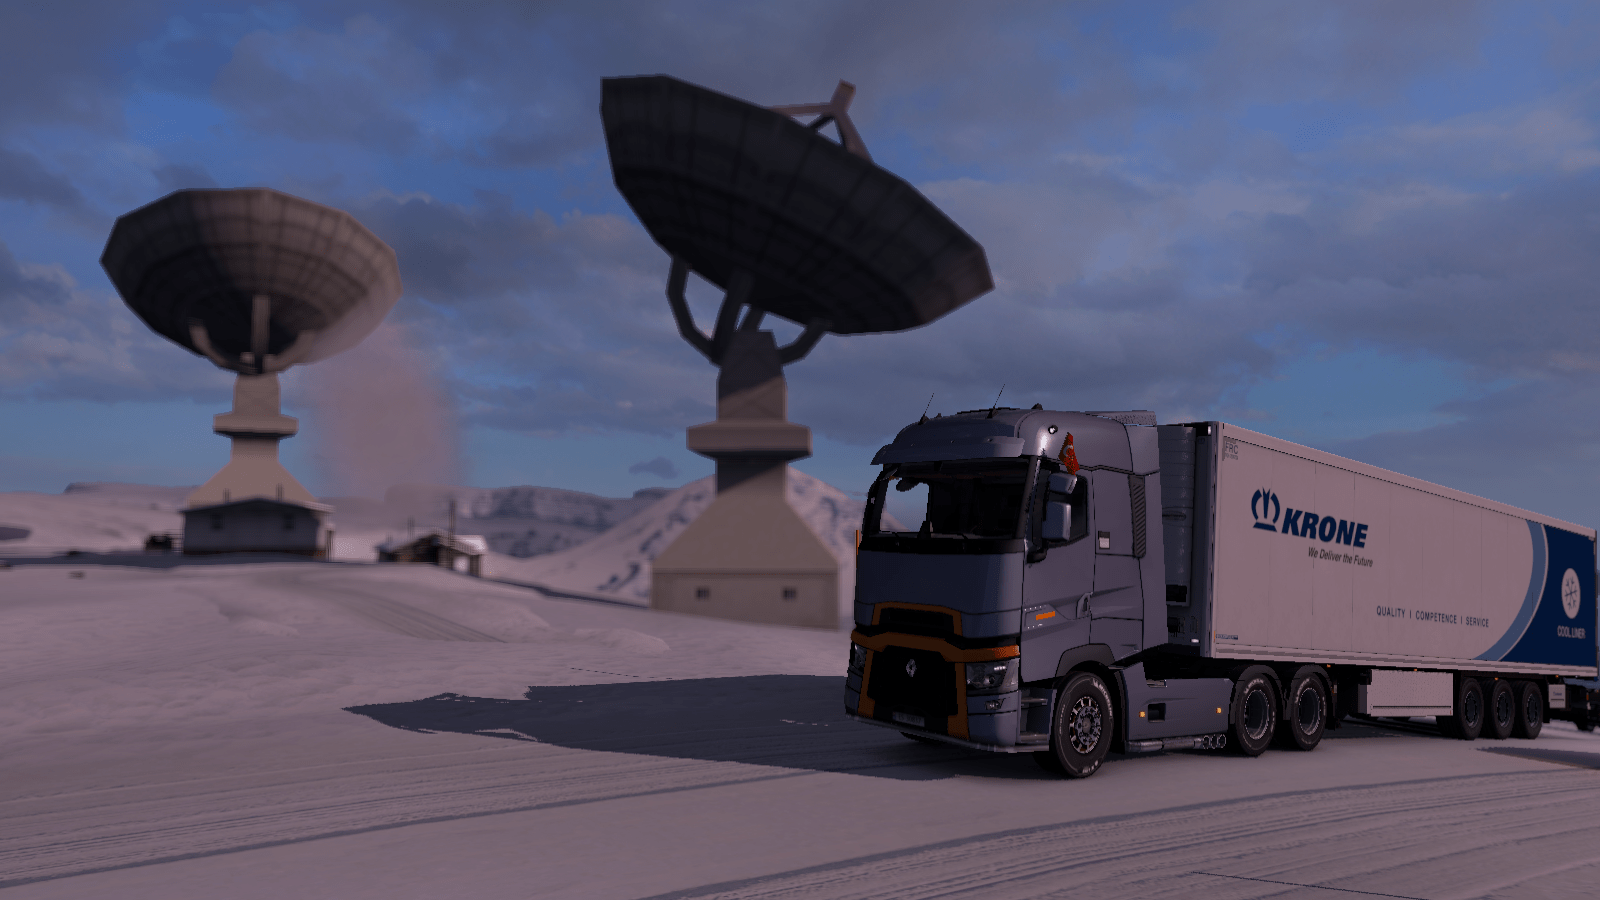 ets2_20191122_212857_00.png